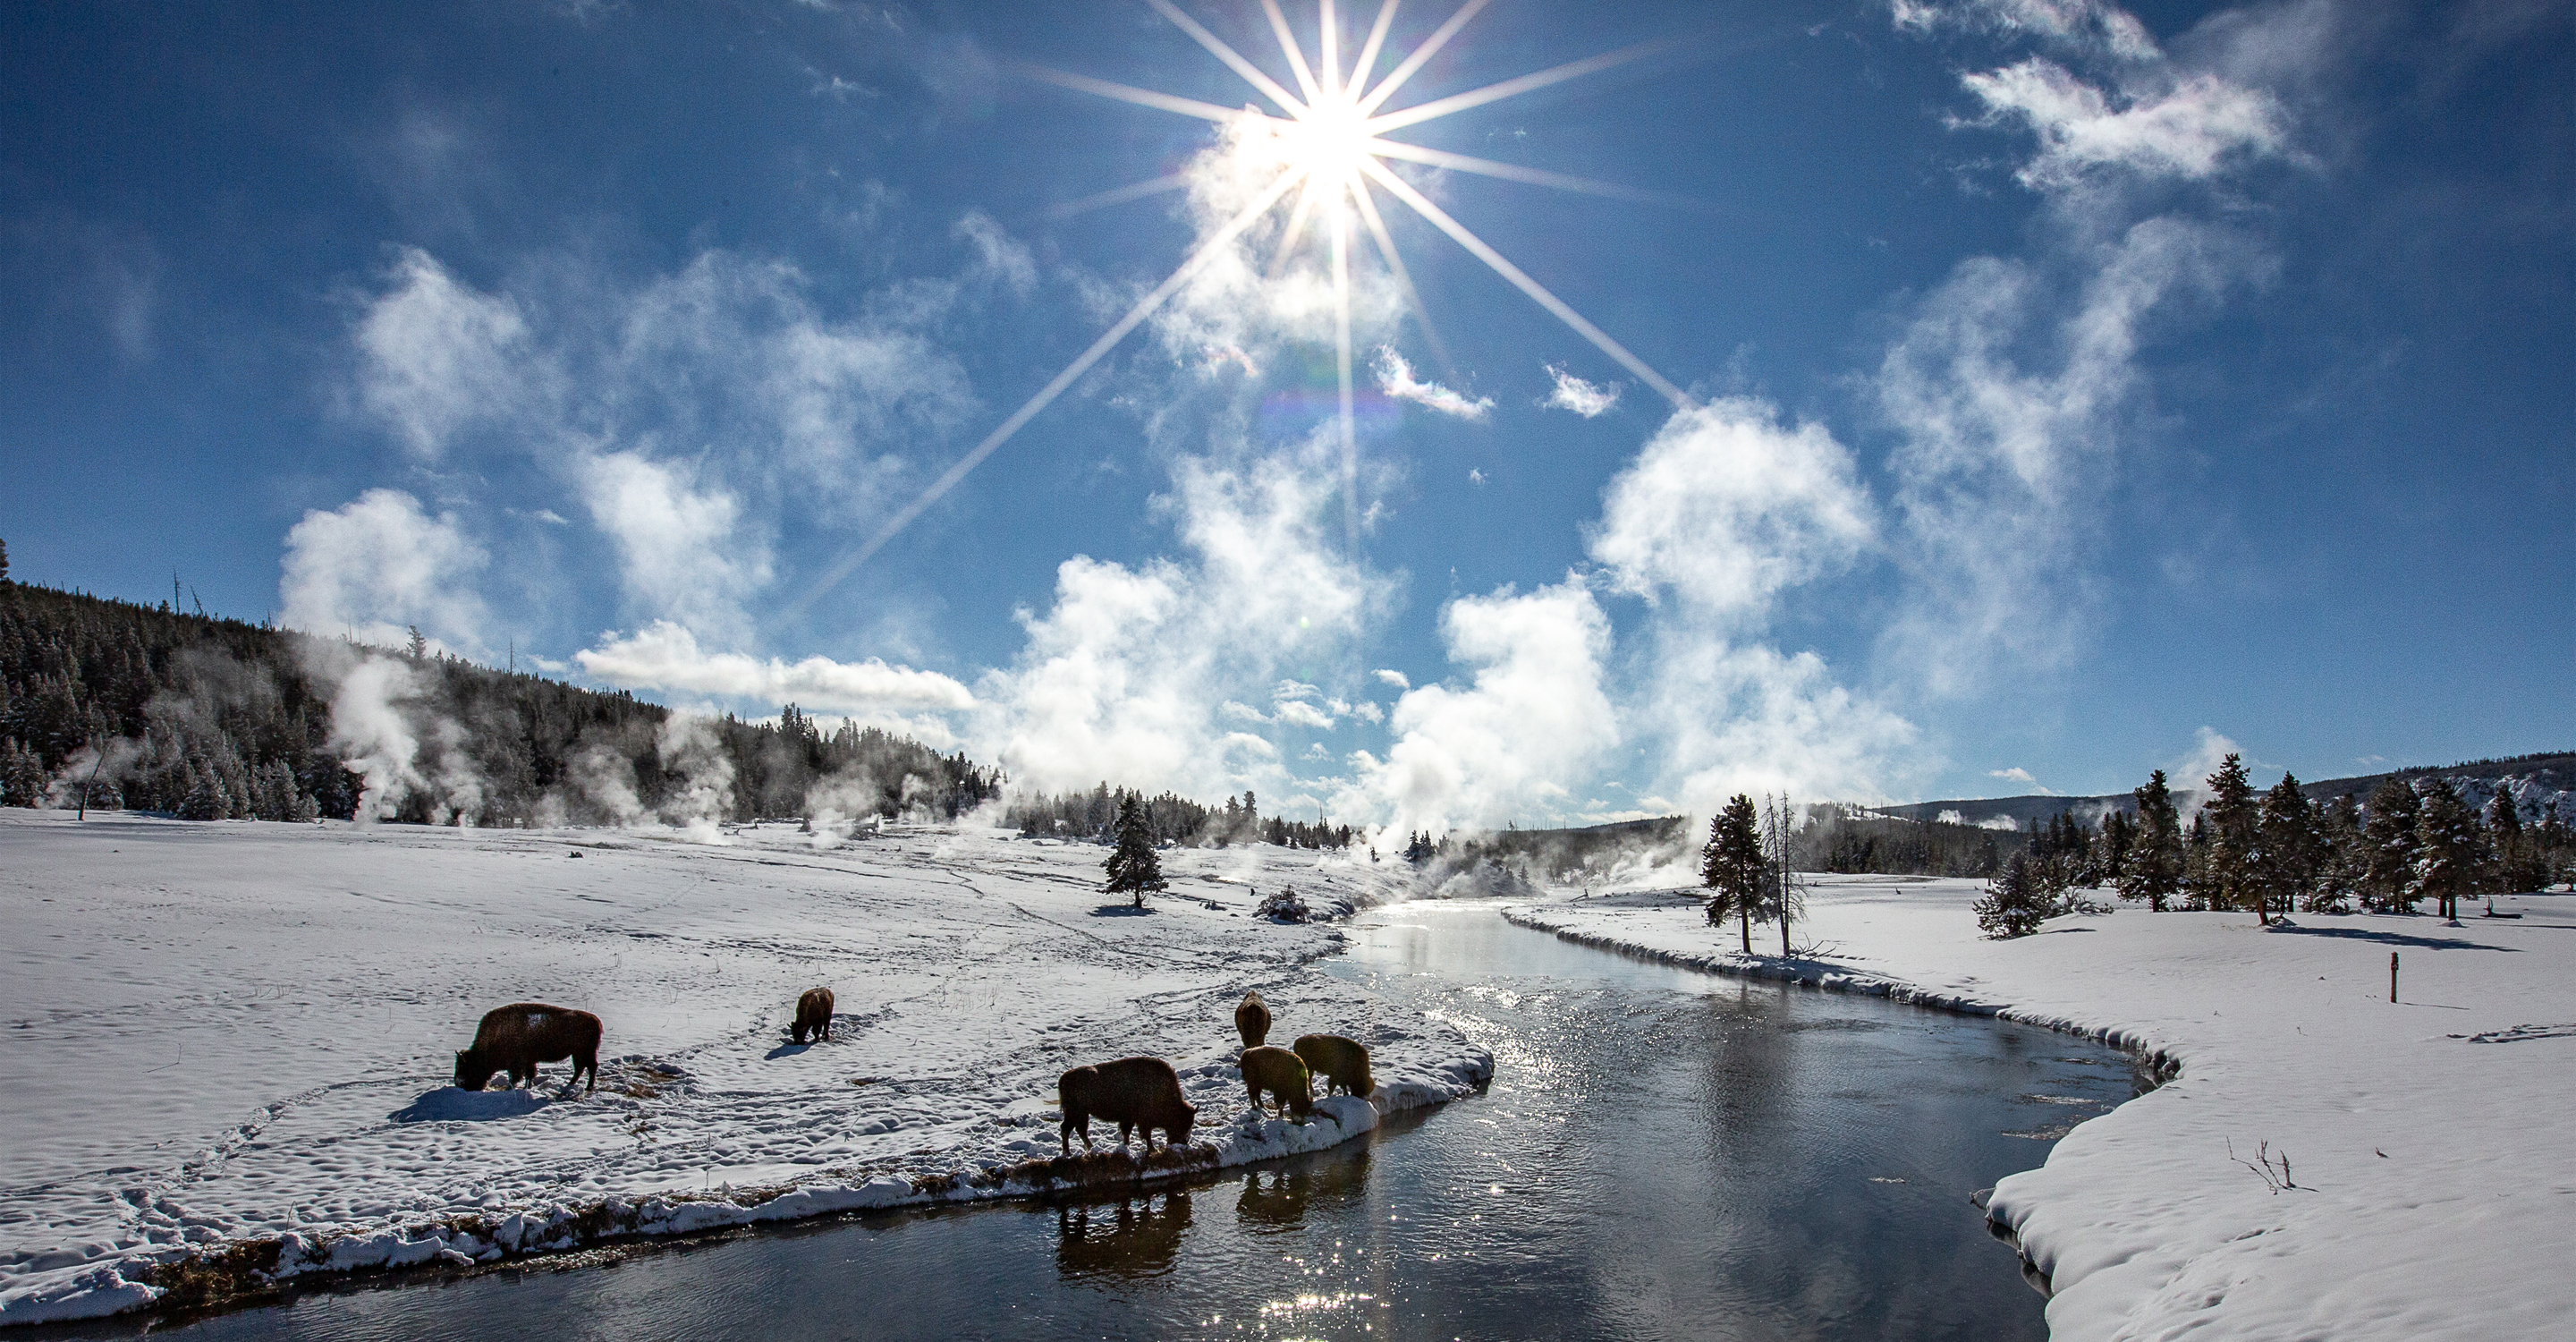 American bison graze along a snowy river bank in Yellowstone National Park, United States